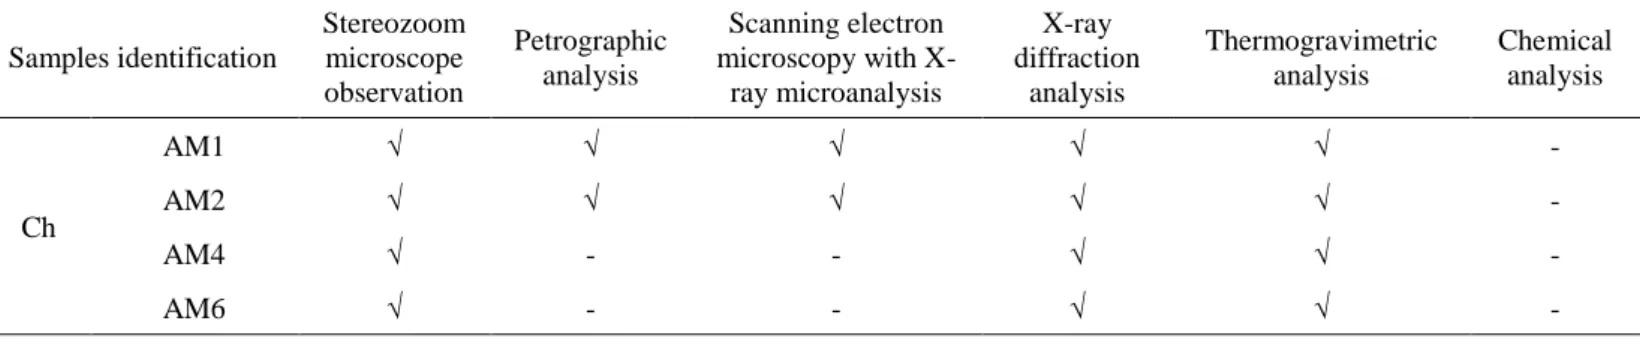 Table 3. Characterization tests performed to assess mineralogical and microstructural properties 